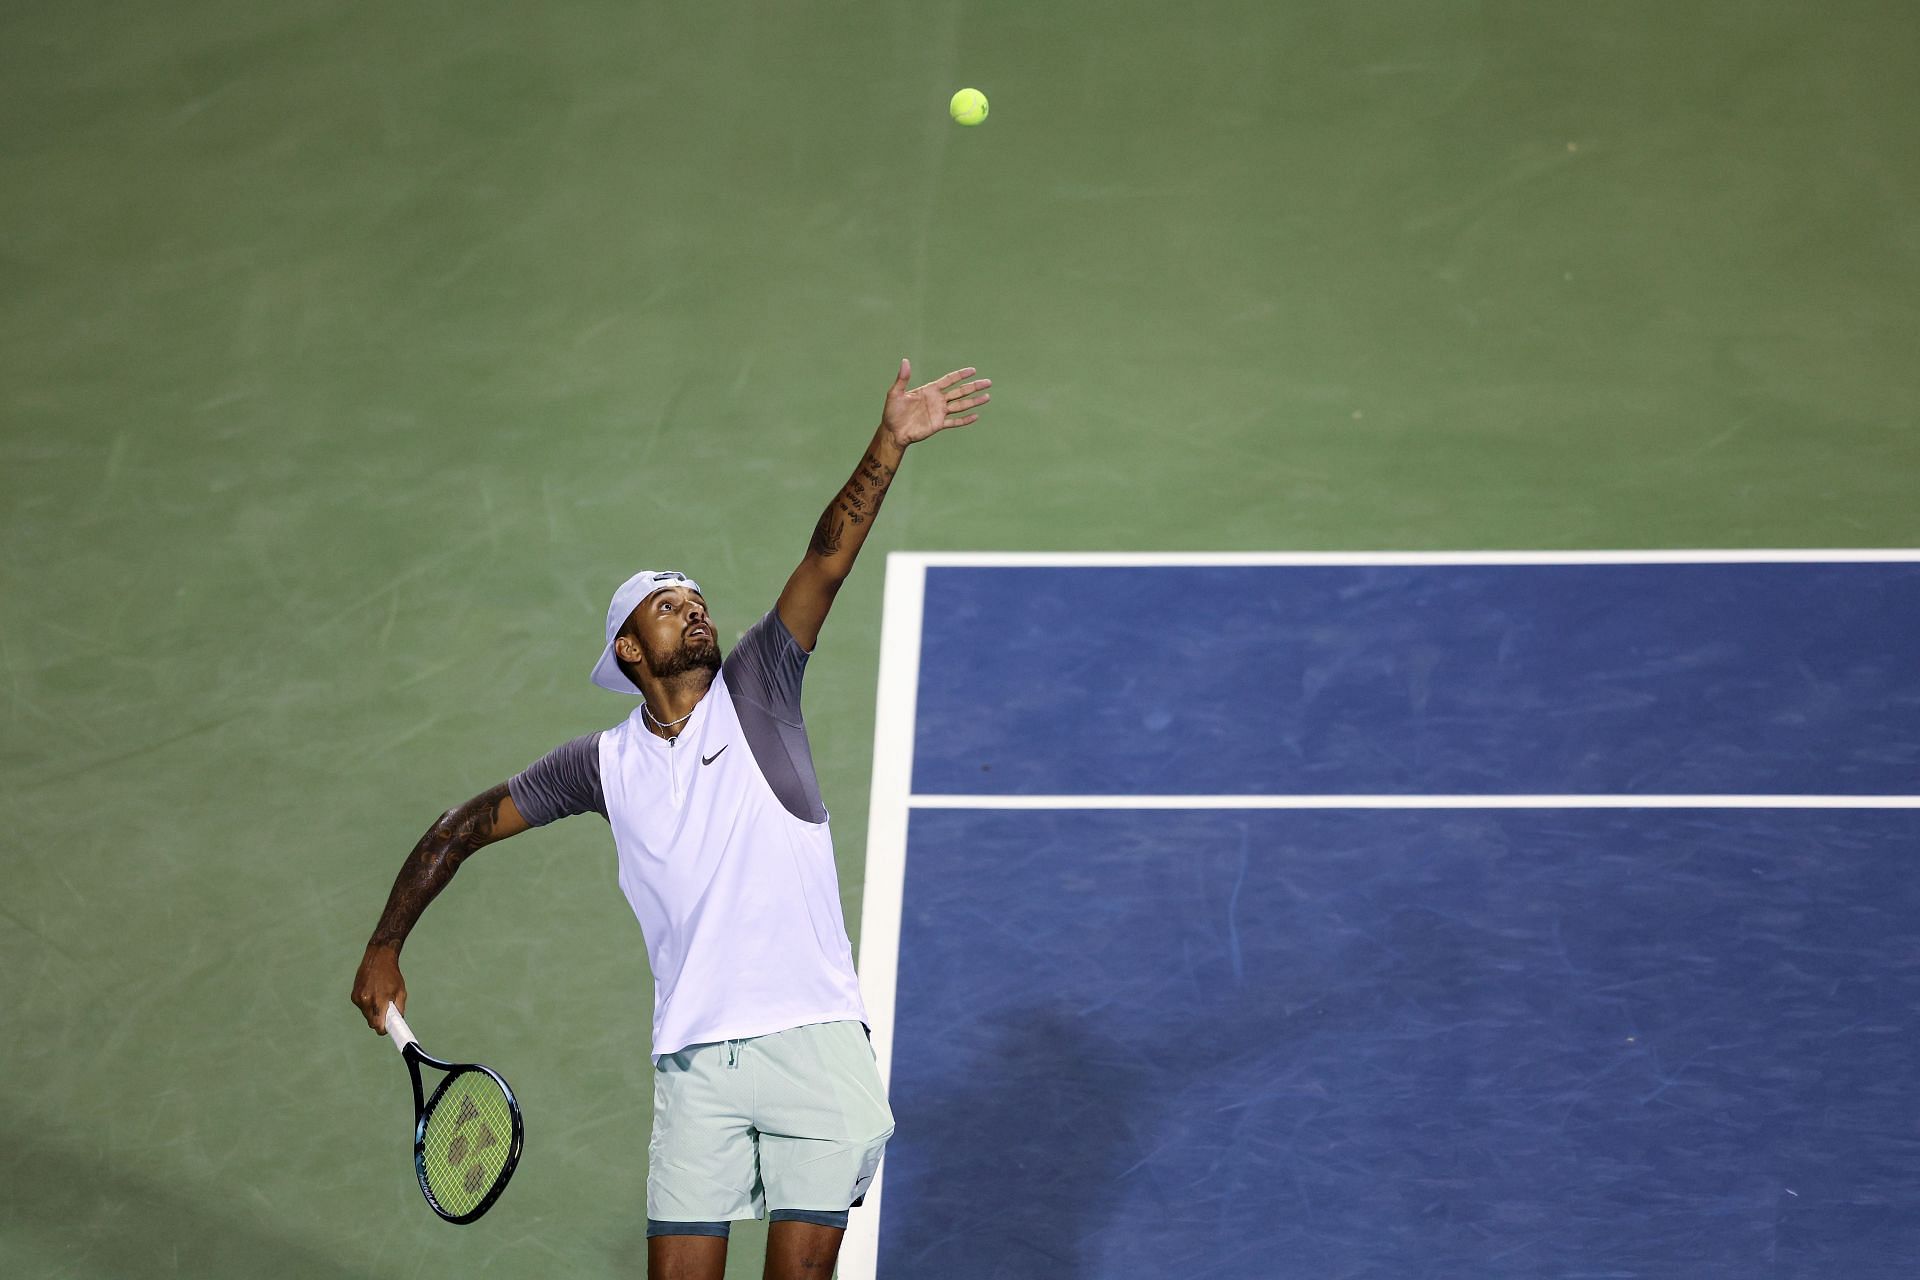 Nick Kyrgios serves during the 2022 Citi Open